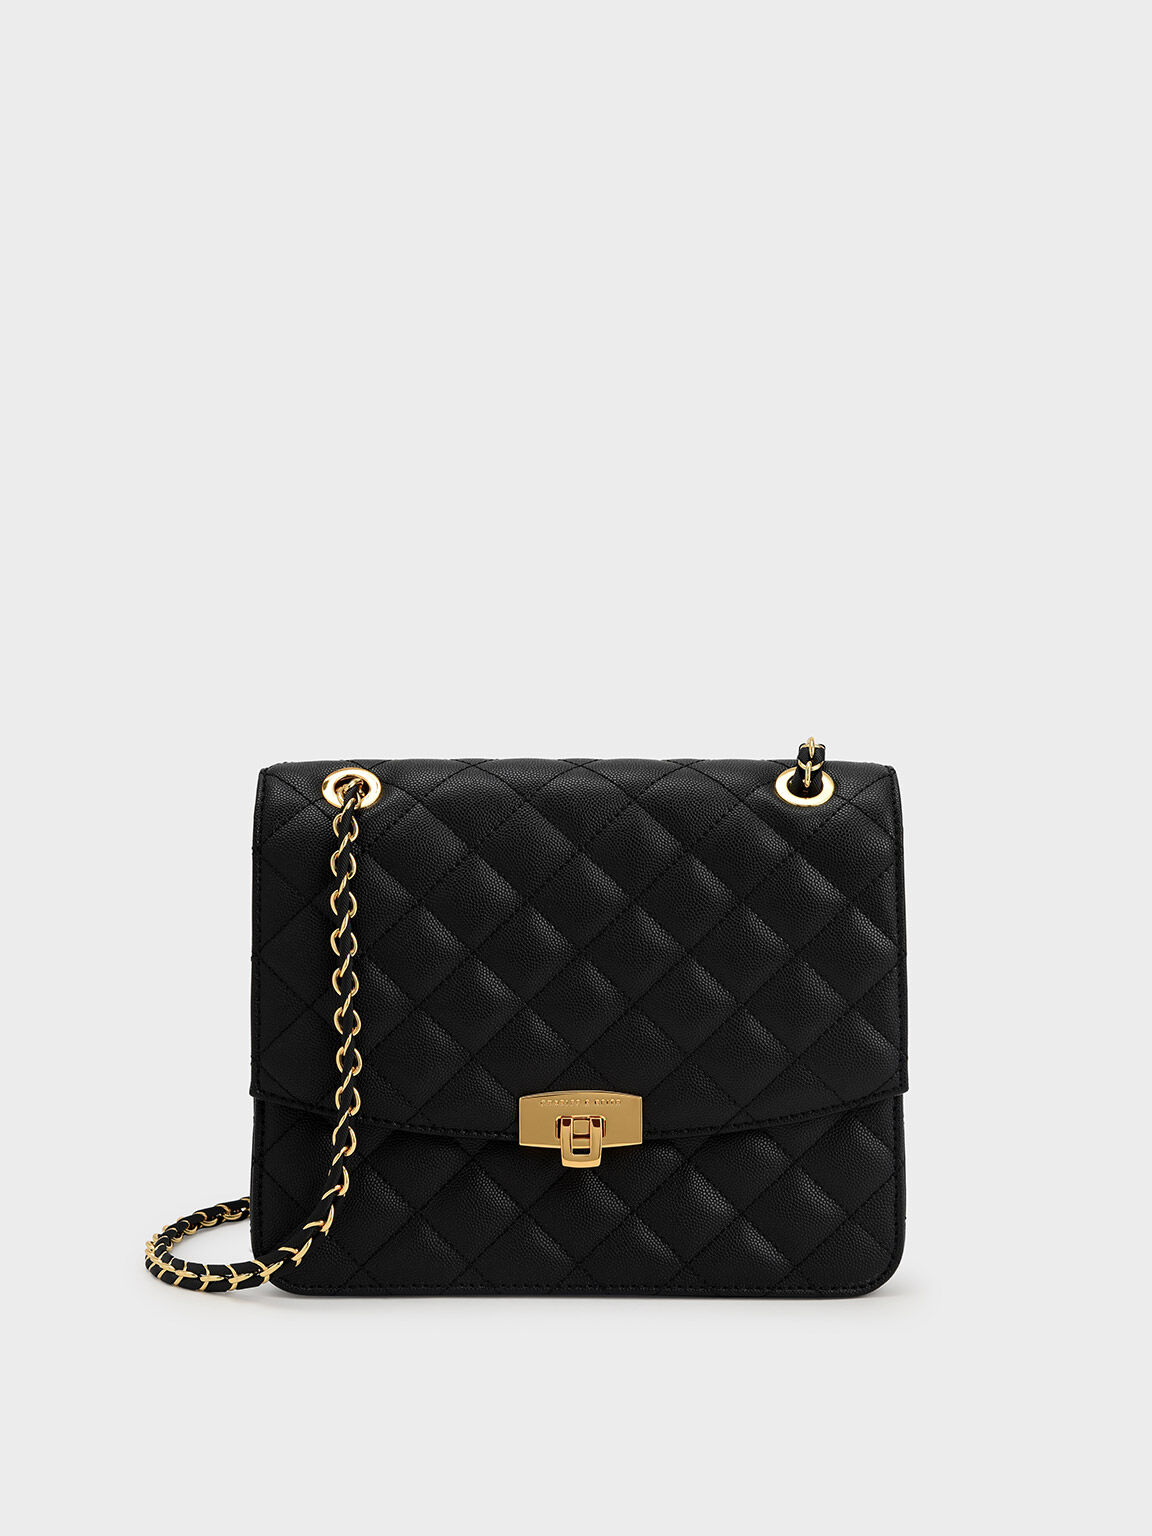 Black Quilted Push-Lock Clutch Bag - Charles & Keith International